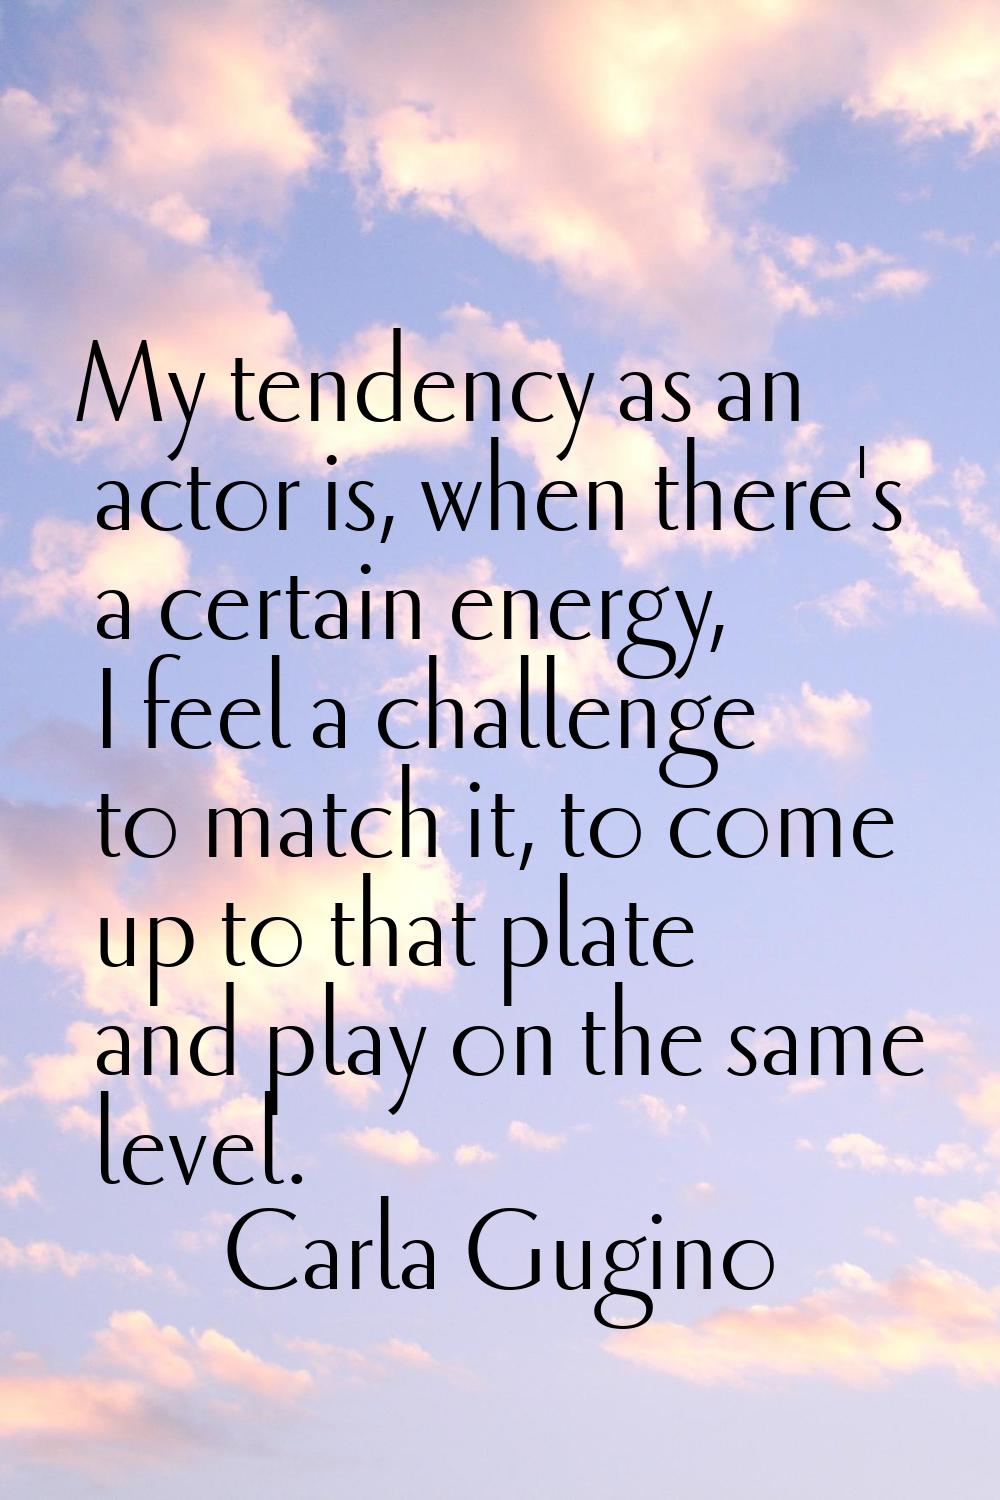 My tendency as an actor is, when there's a certain energy, I feel a challenge to match it, to come 